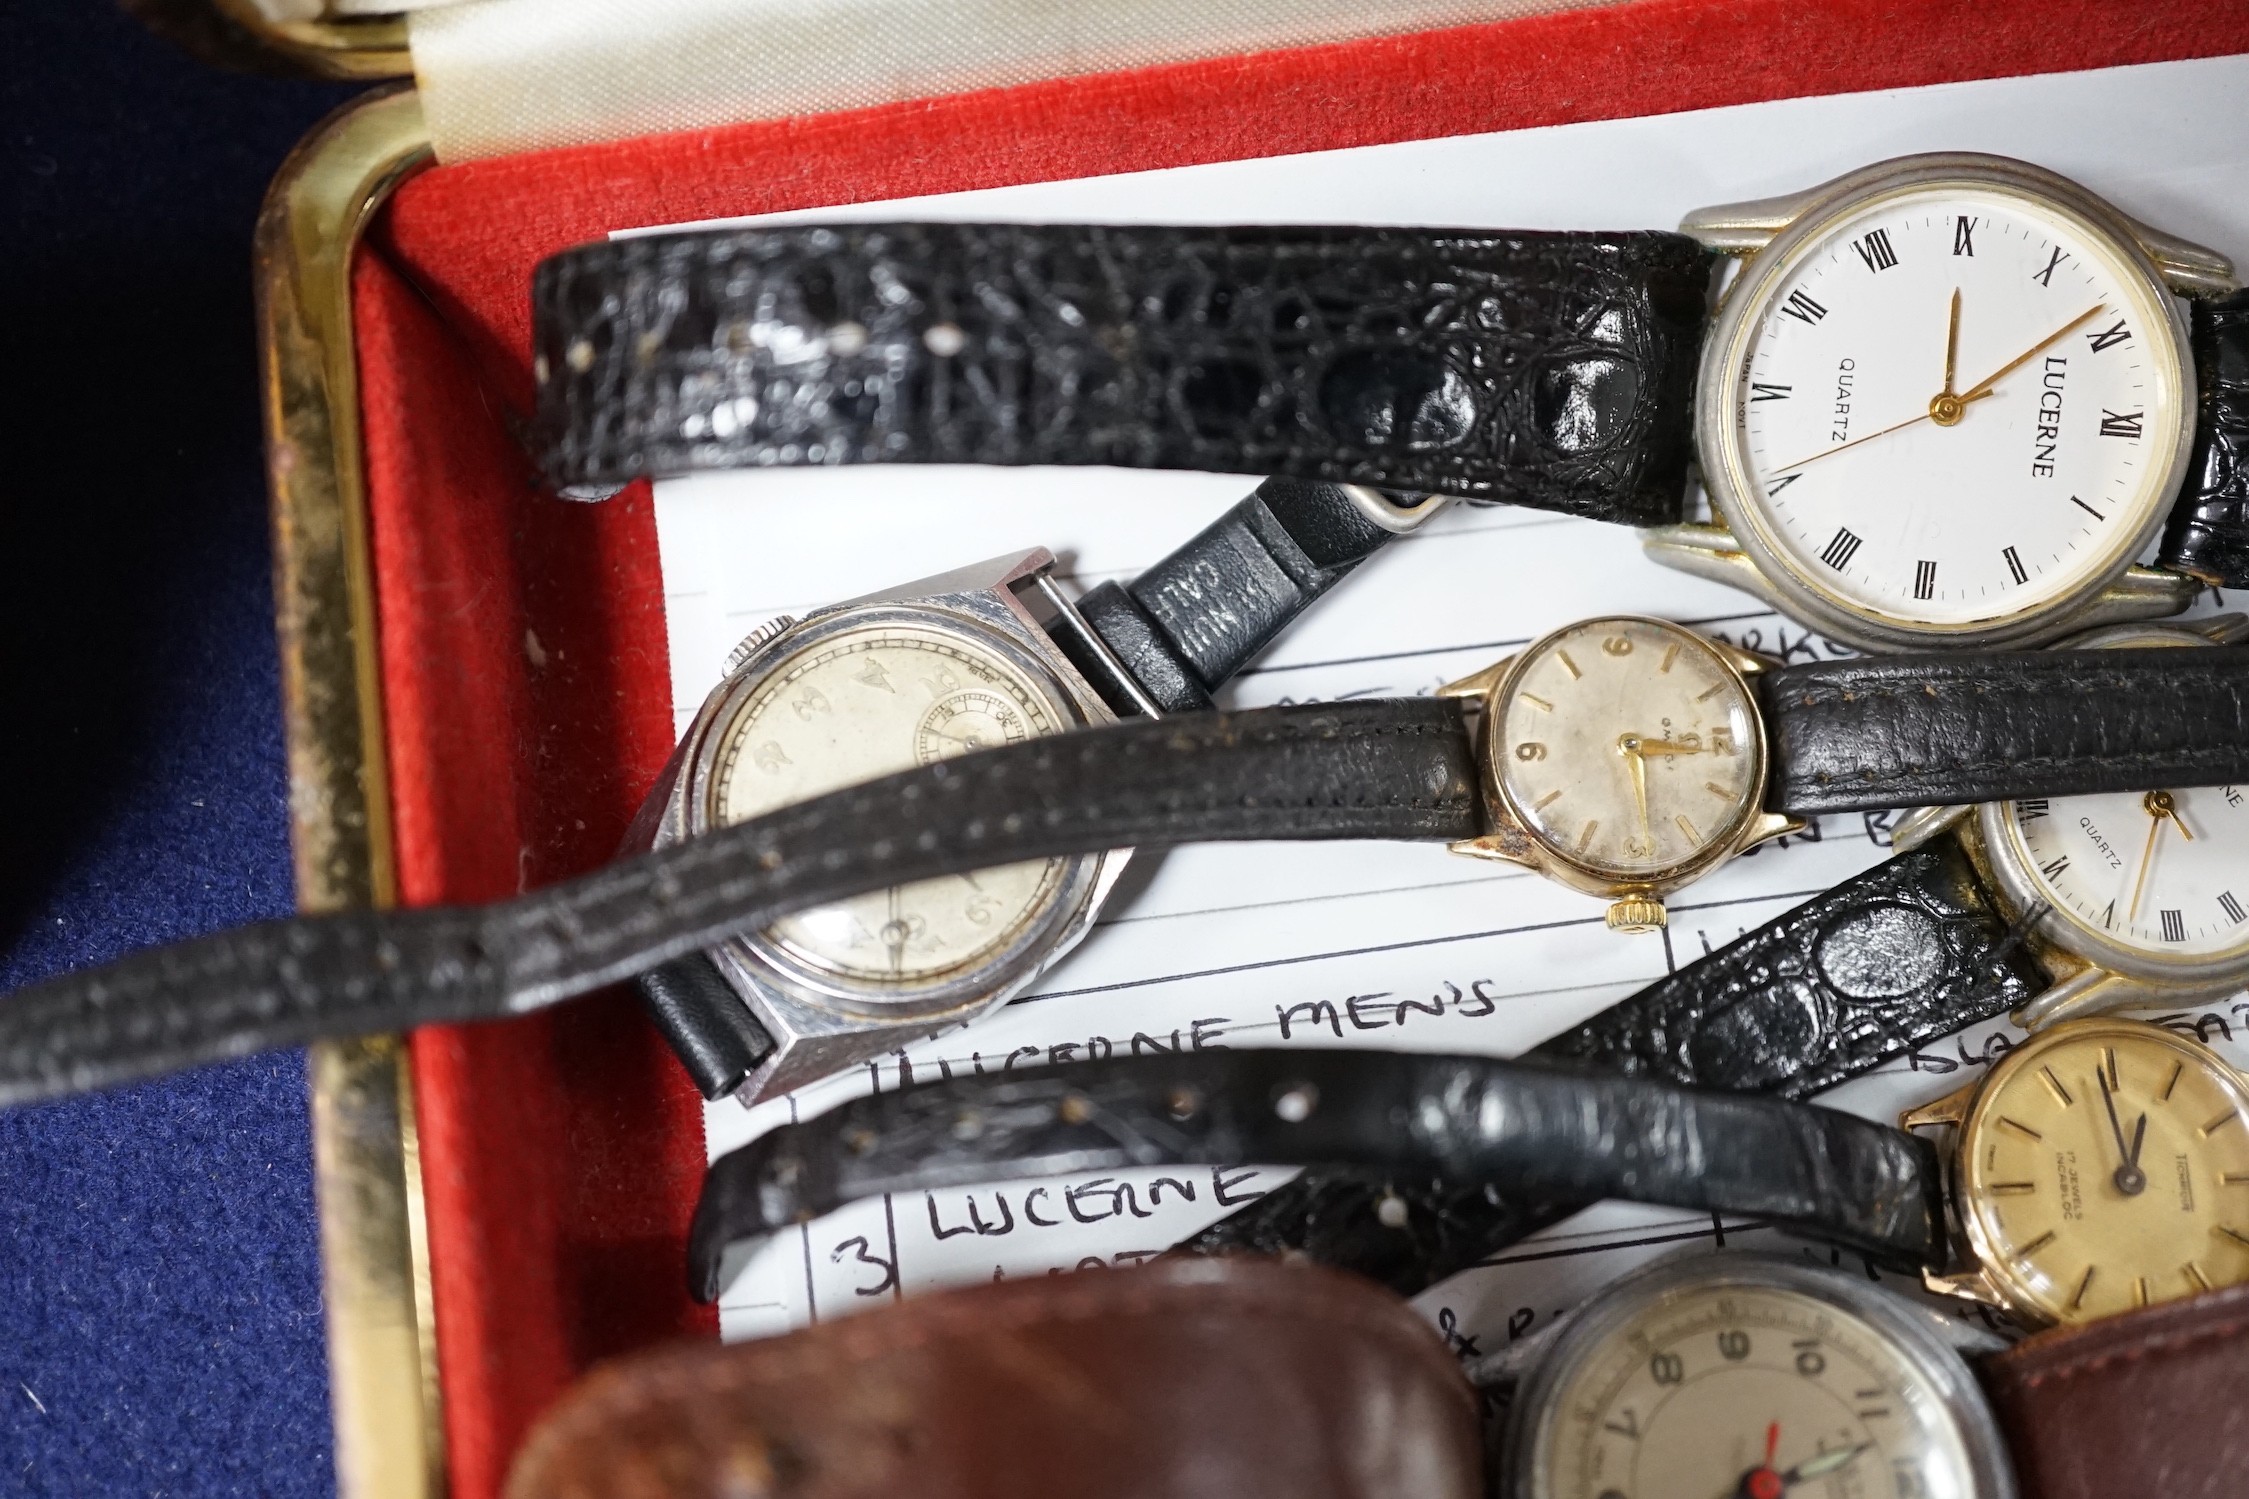 A group of assorted lady's and gentleman's wrist watches including a lady's 9ct Omega and Tichnique, two Lucerne quartz and two steel watches including Festiva.